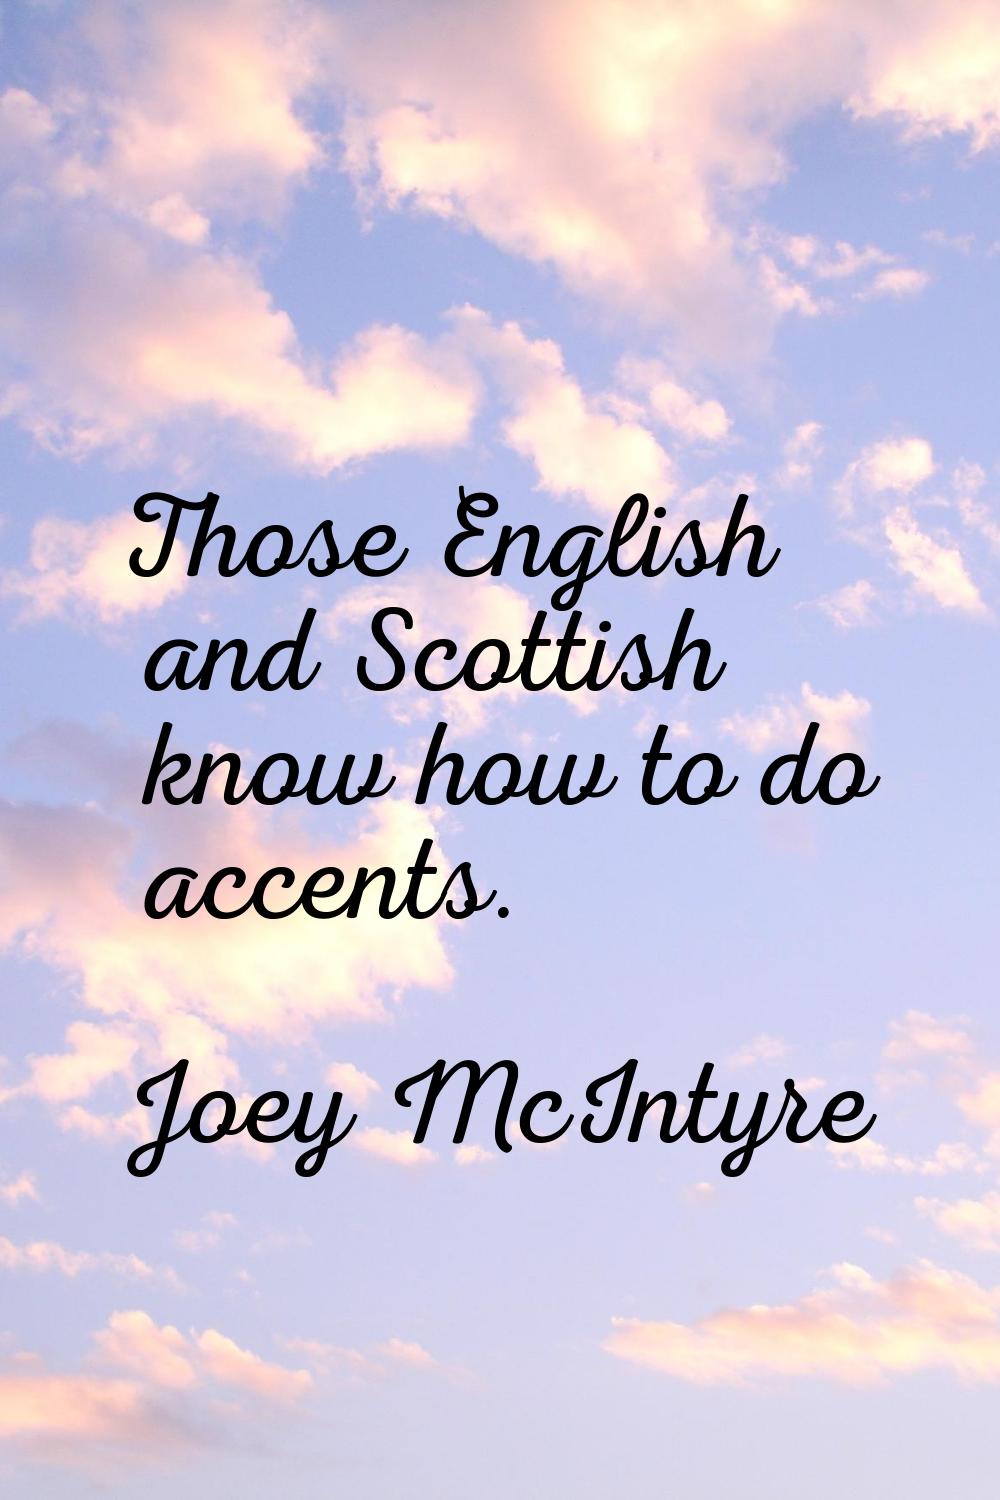 Those English and Scottish know how to do accents.